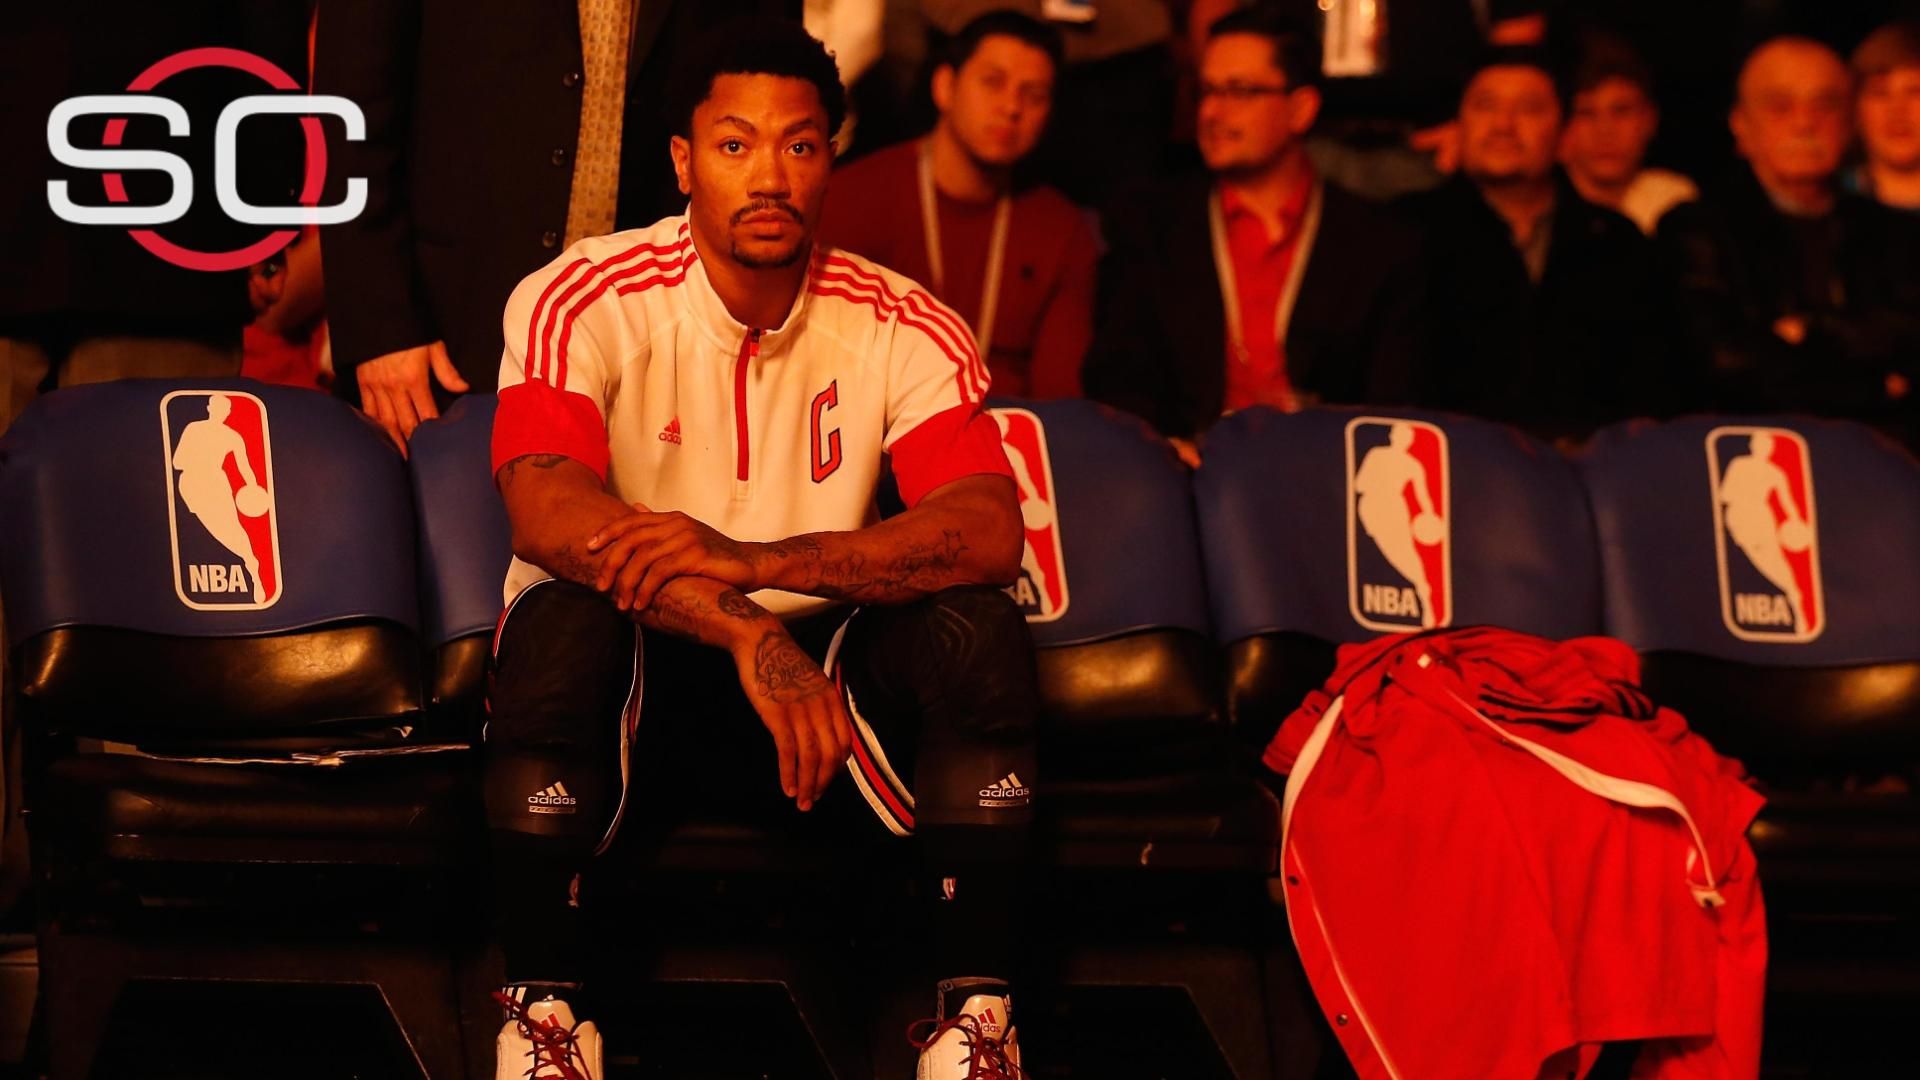 Derrick Rose suffers another injury